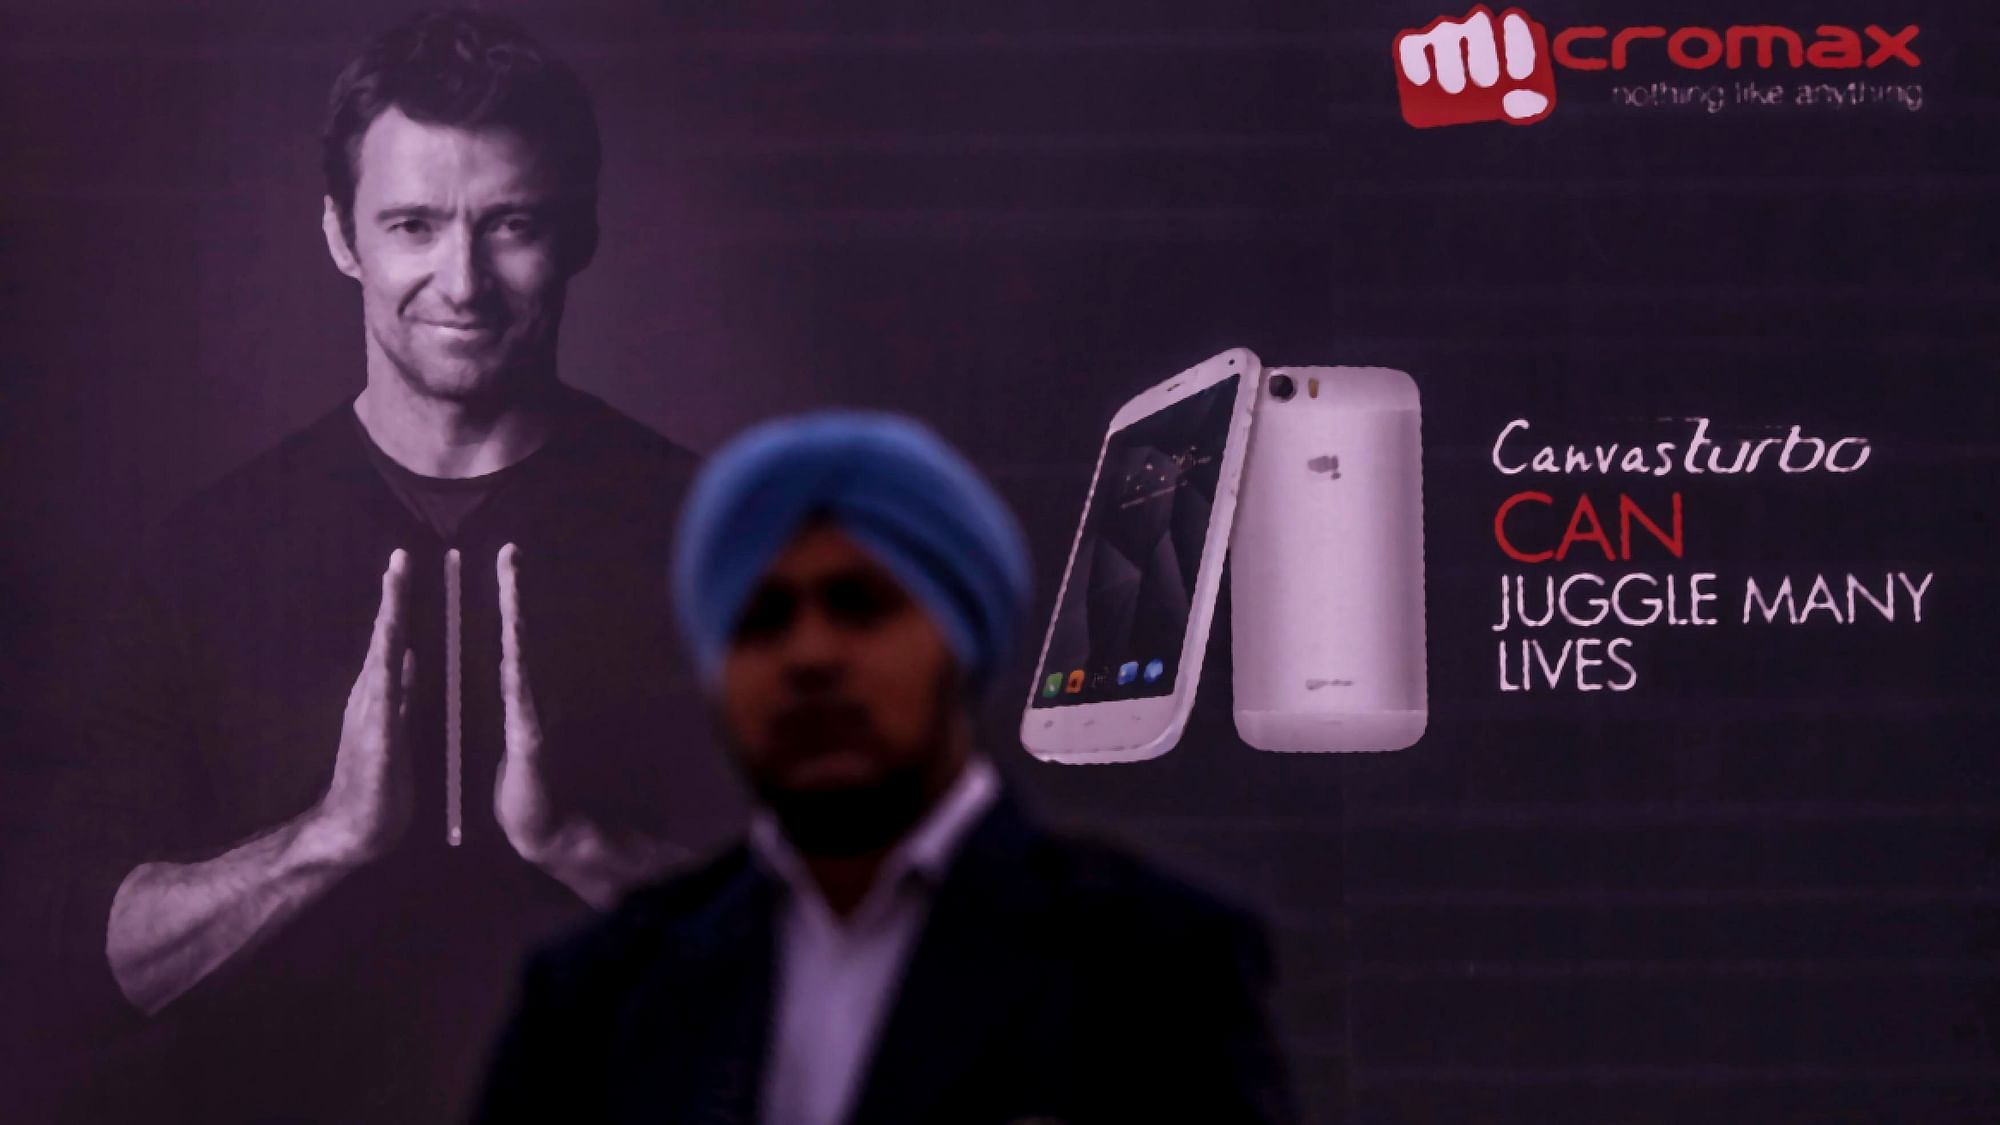 Hugh Jackman was made the brand ambassador of Micromax for a brief period. (Photo: Altered by <b>The Quint</b>)